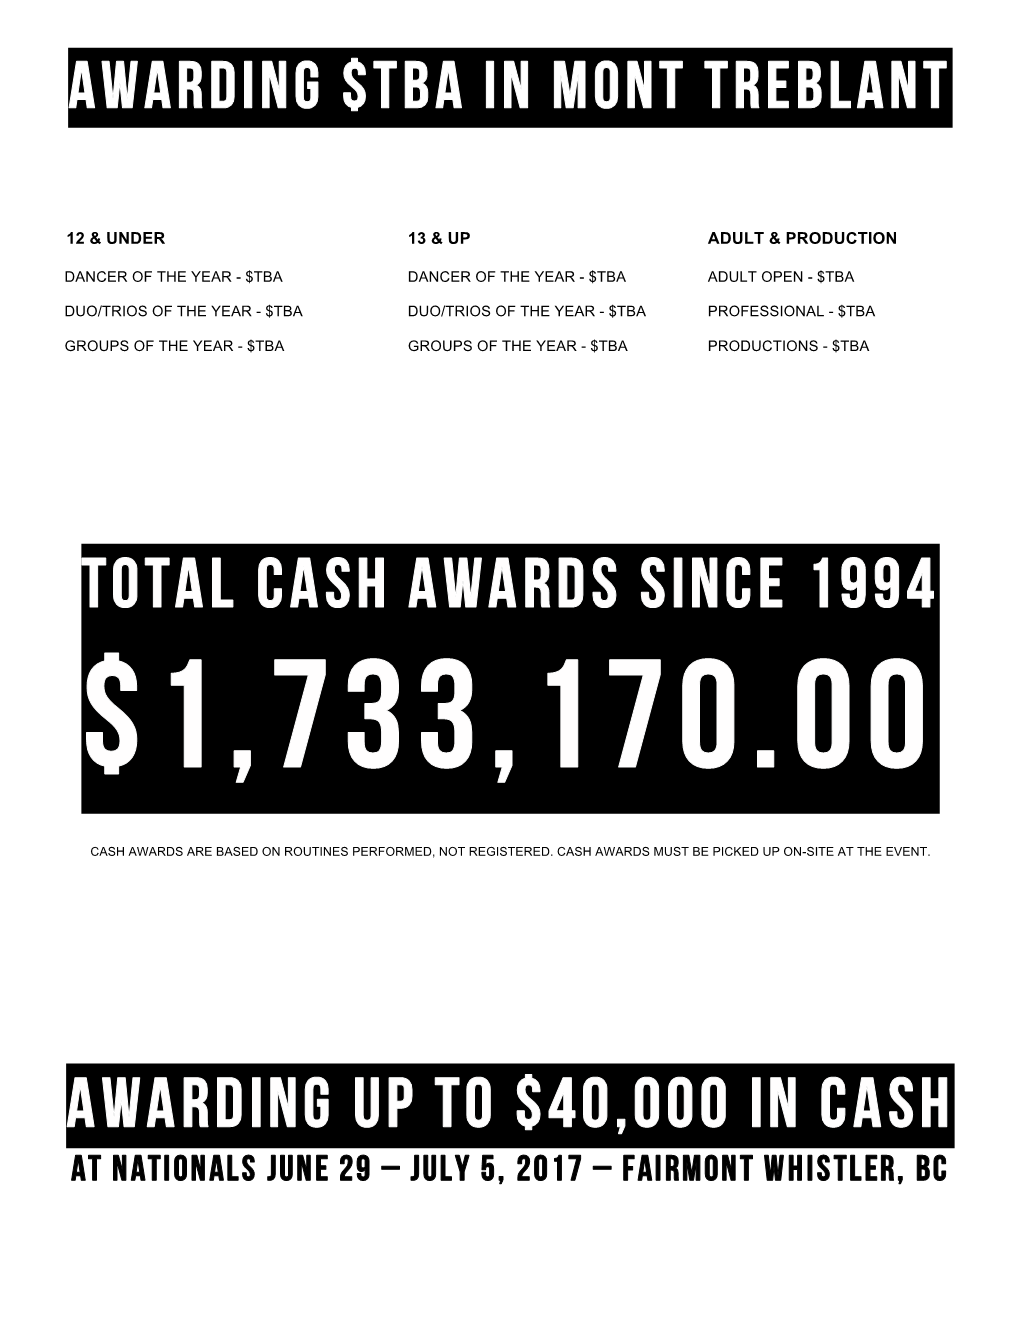 TOTAL CASH AWARDS SINCE 1994 AWARDING up to $40,000 in Cash